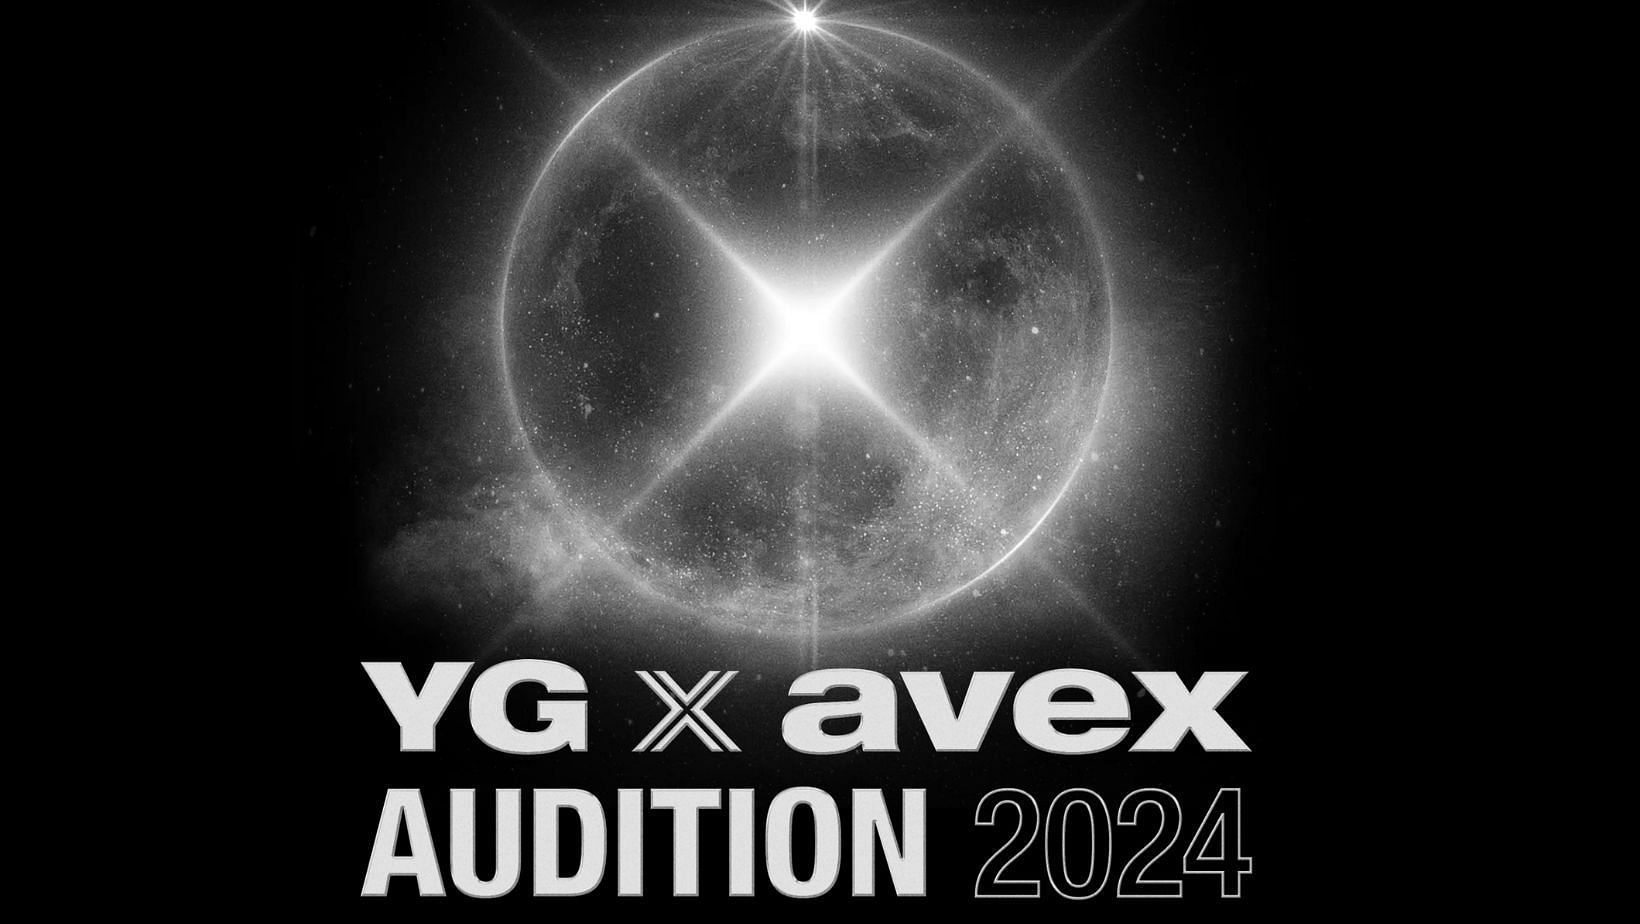 YG Entertainment opens auditions for a new K-pop group aged between 2003-2013, in collaboration with Avex. (Image via  ygavexaudition2024.com)